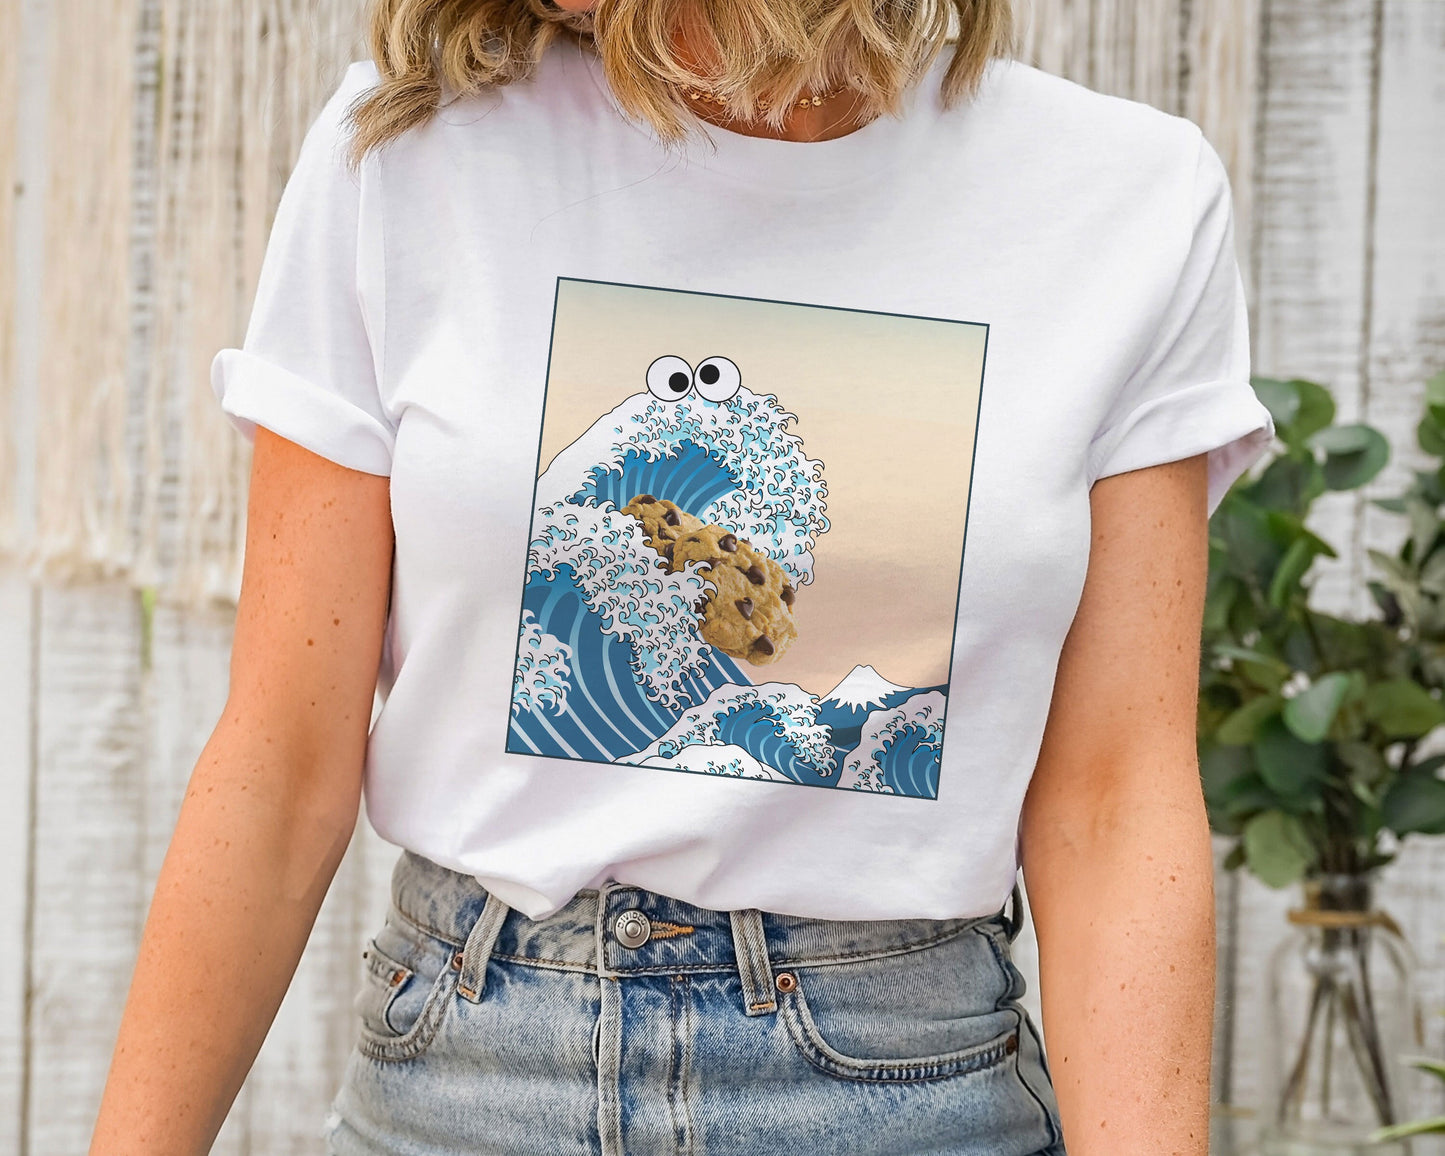 Cookie Monster Japanese Wave Painting Parody Ultra Soft Graphic Tee Unisex Soft Tee T-shirt for Women or Men